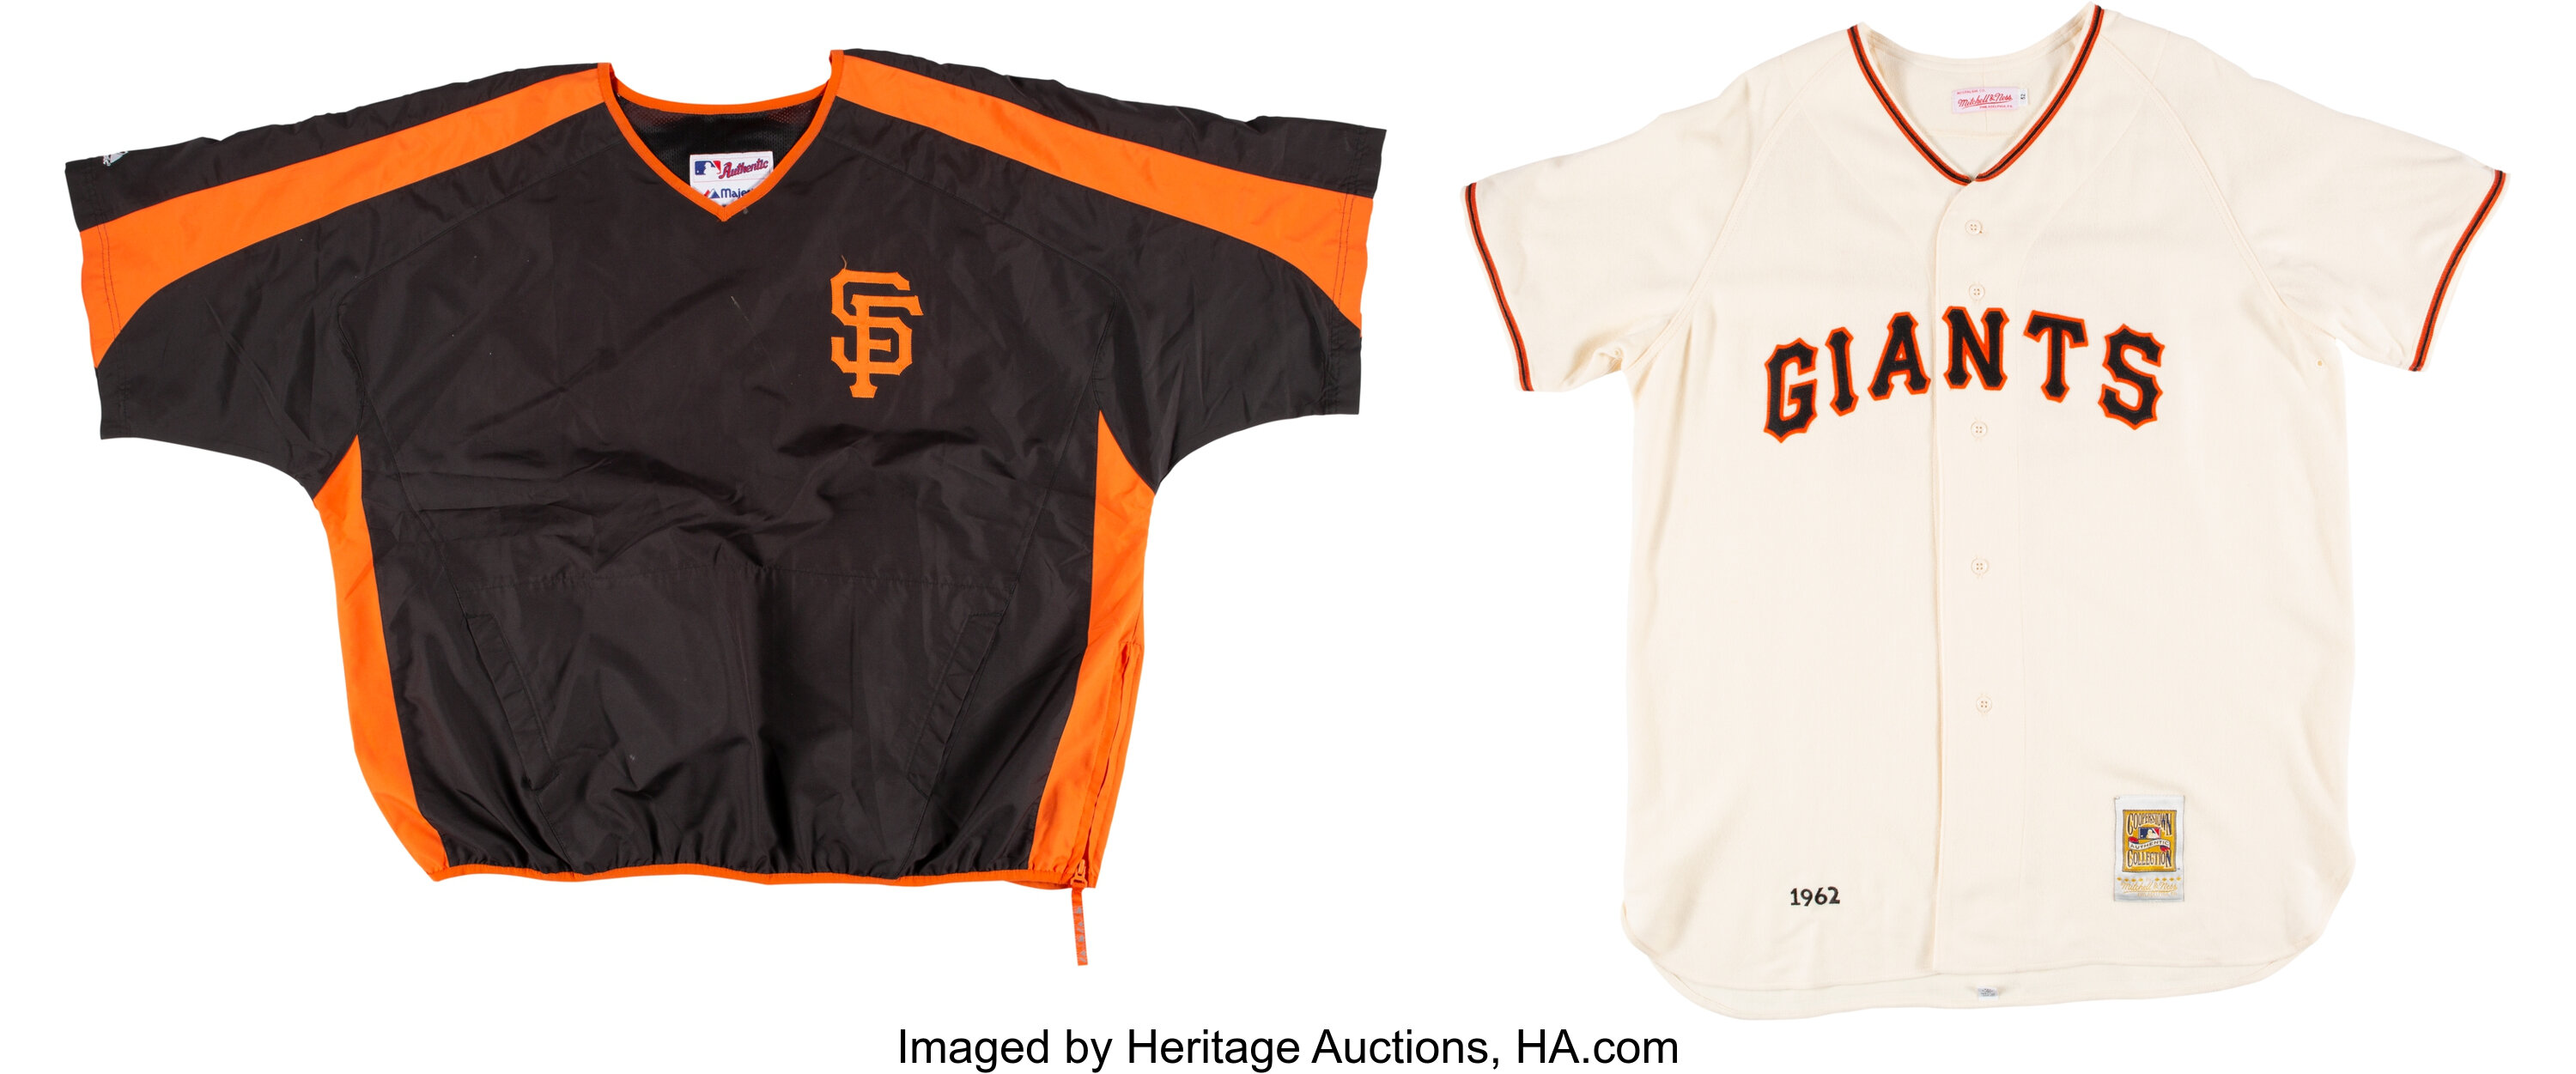 2010 Willie McCovey Worn San Francisco Giants World Series